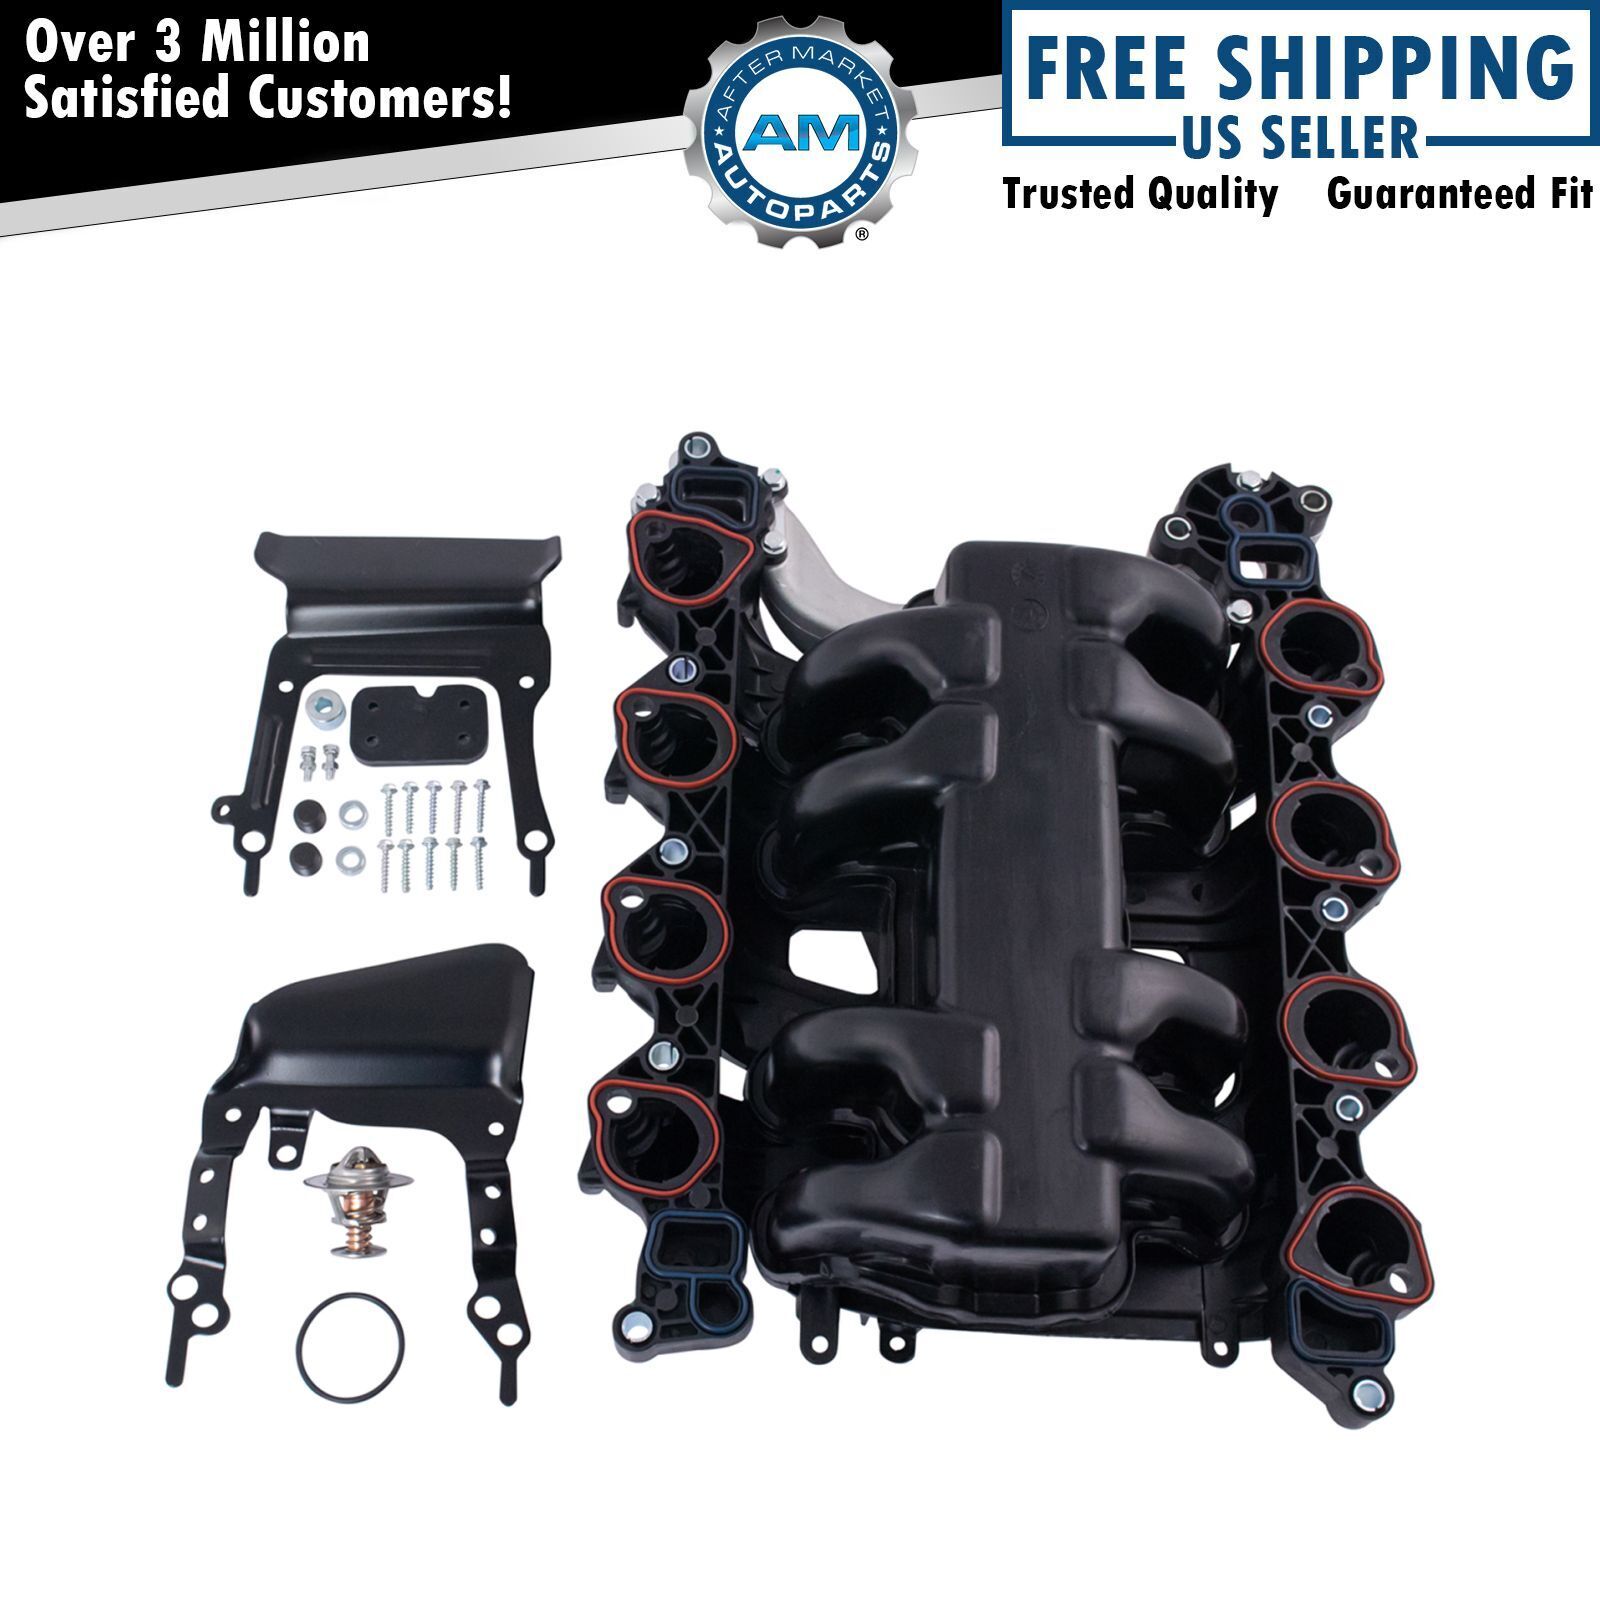 NEW Intake Manifold w/ Gasket Thermostat O-Rings for Ford Lincoln Mercury 4.6L